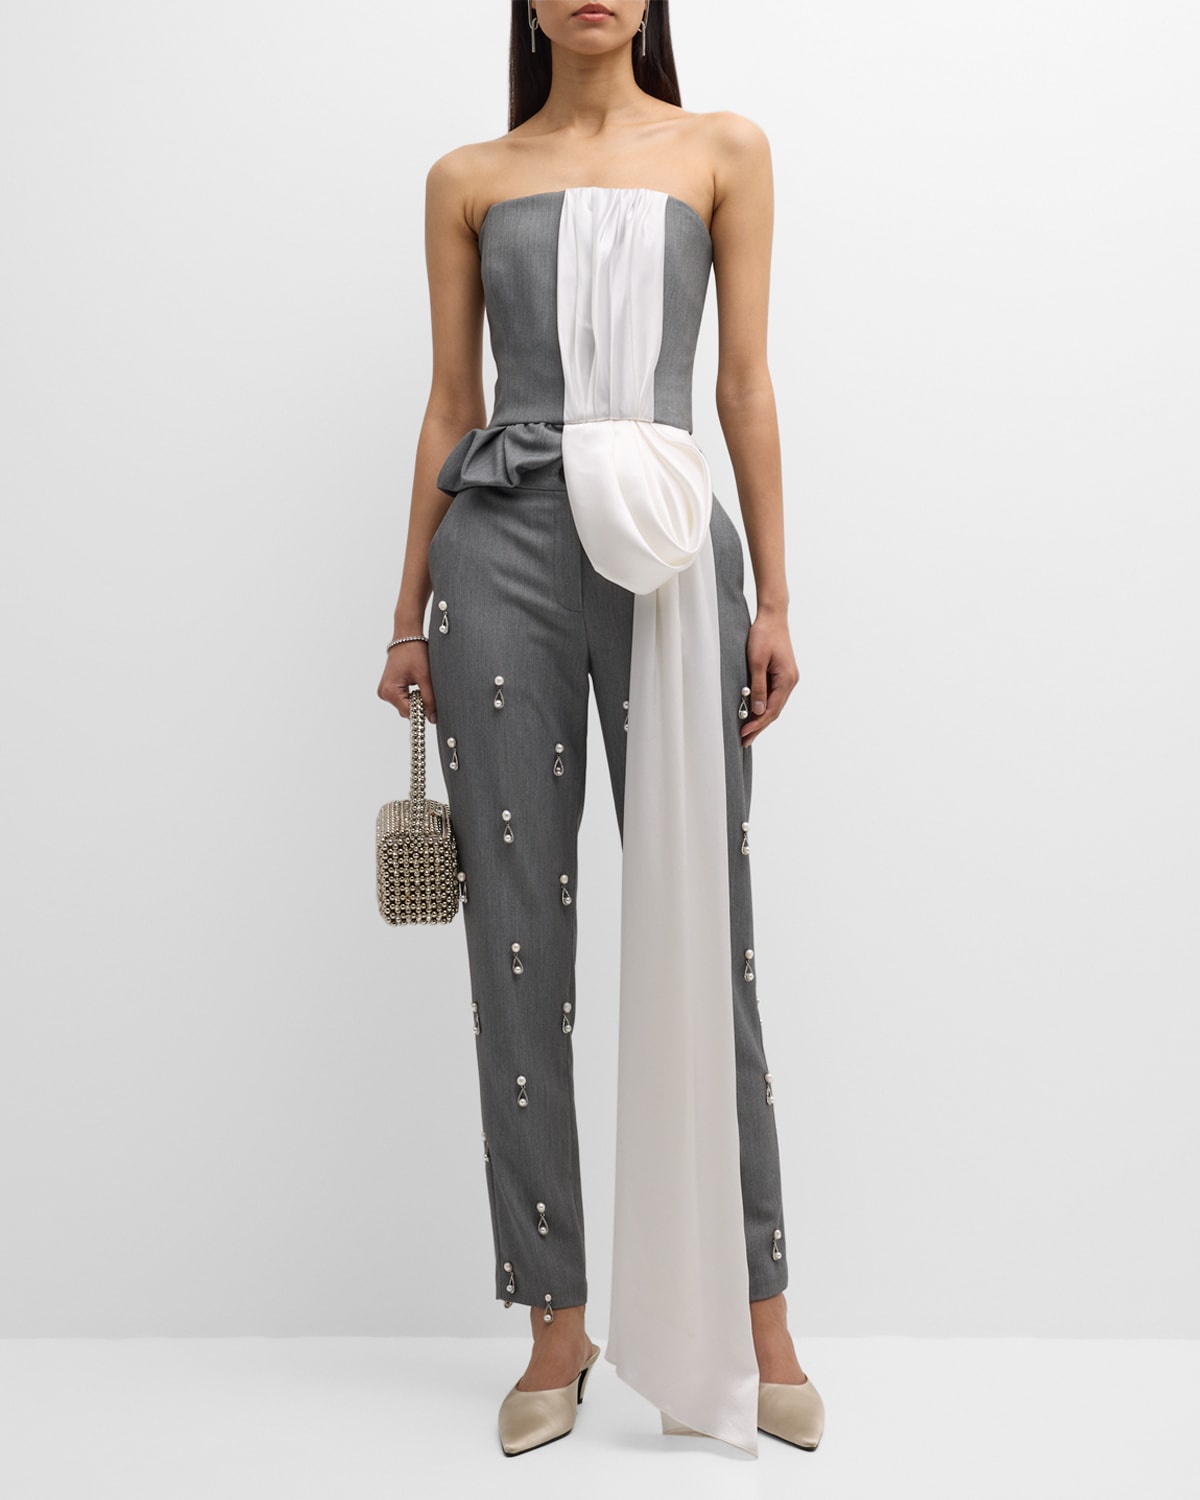 Hellessy Honore Asymmetric Bustier With Long Drape In Ash Grey